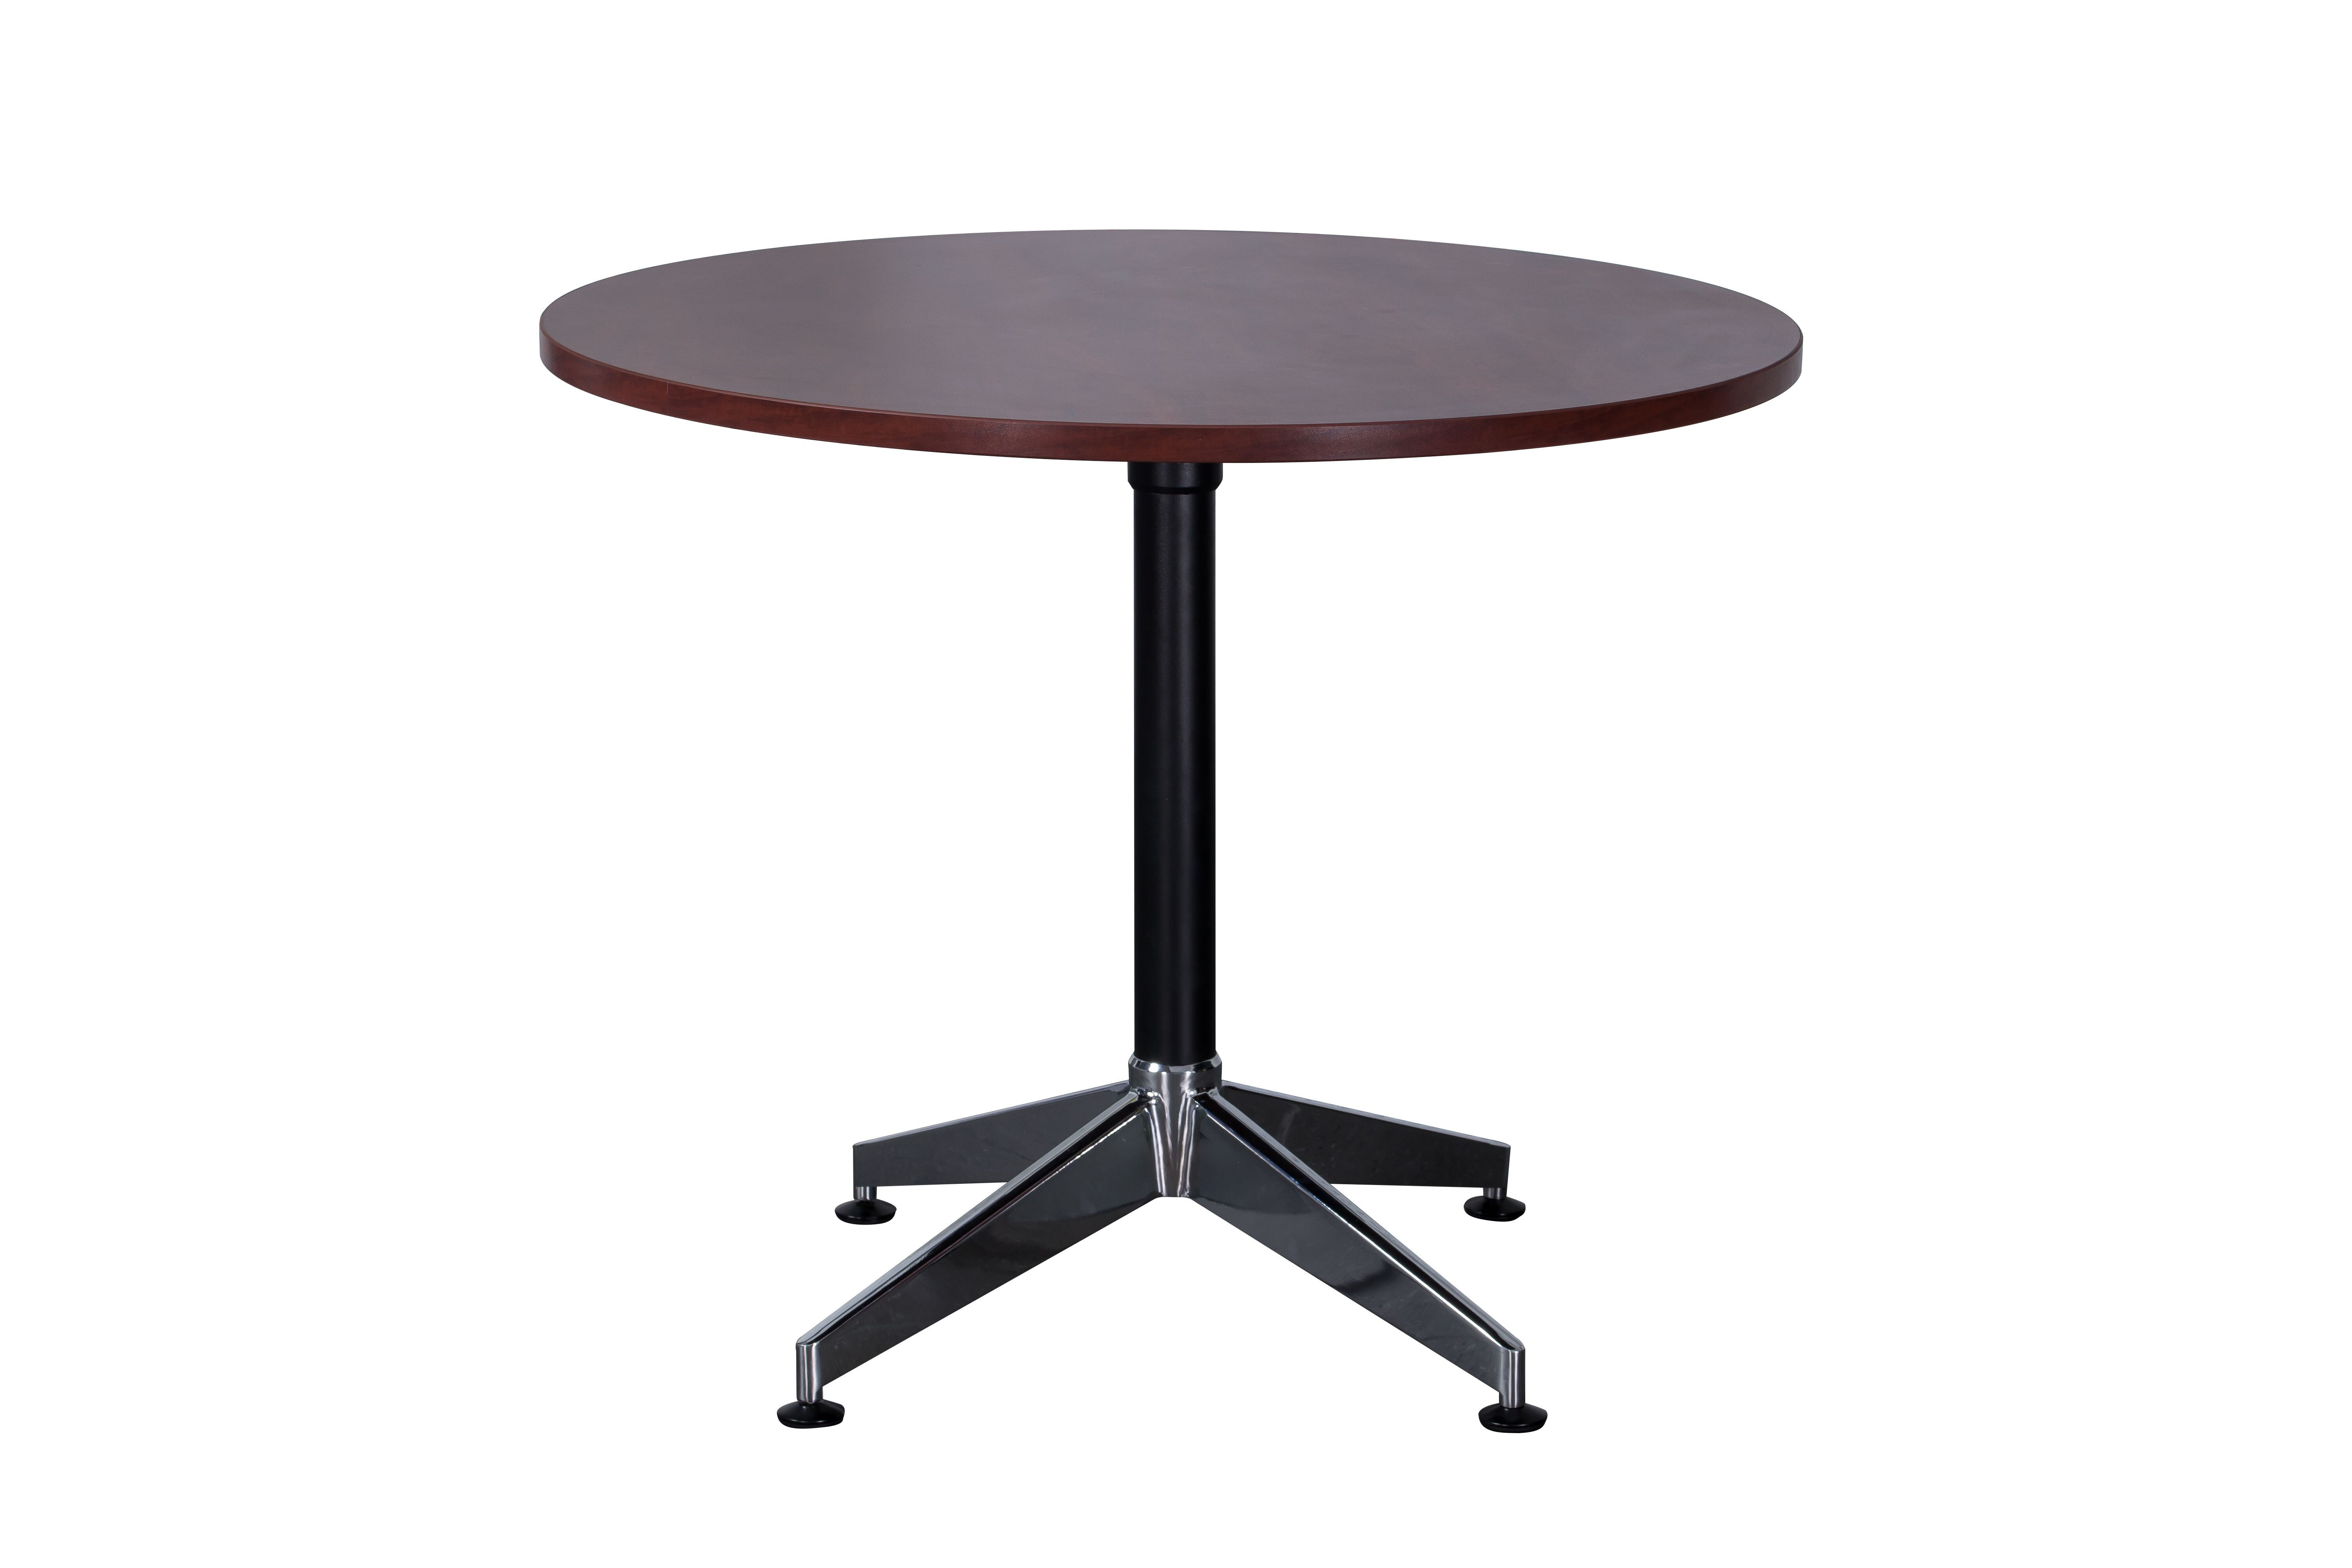 Mirage round meeting table